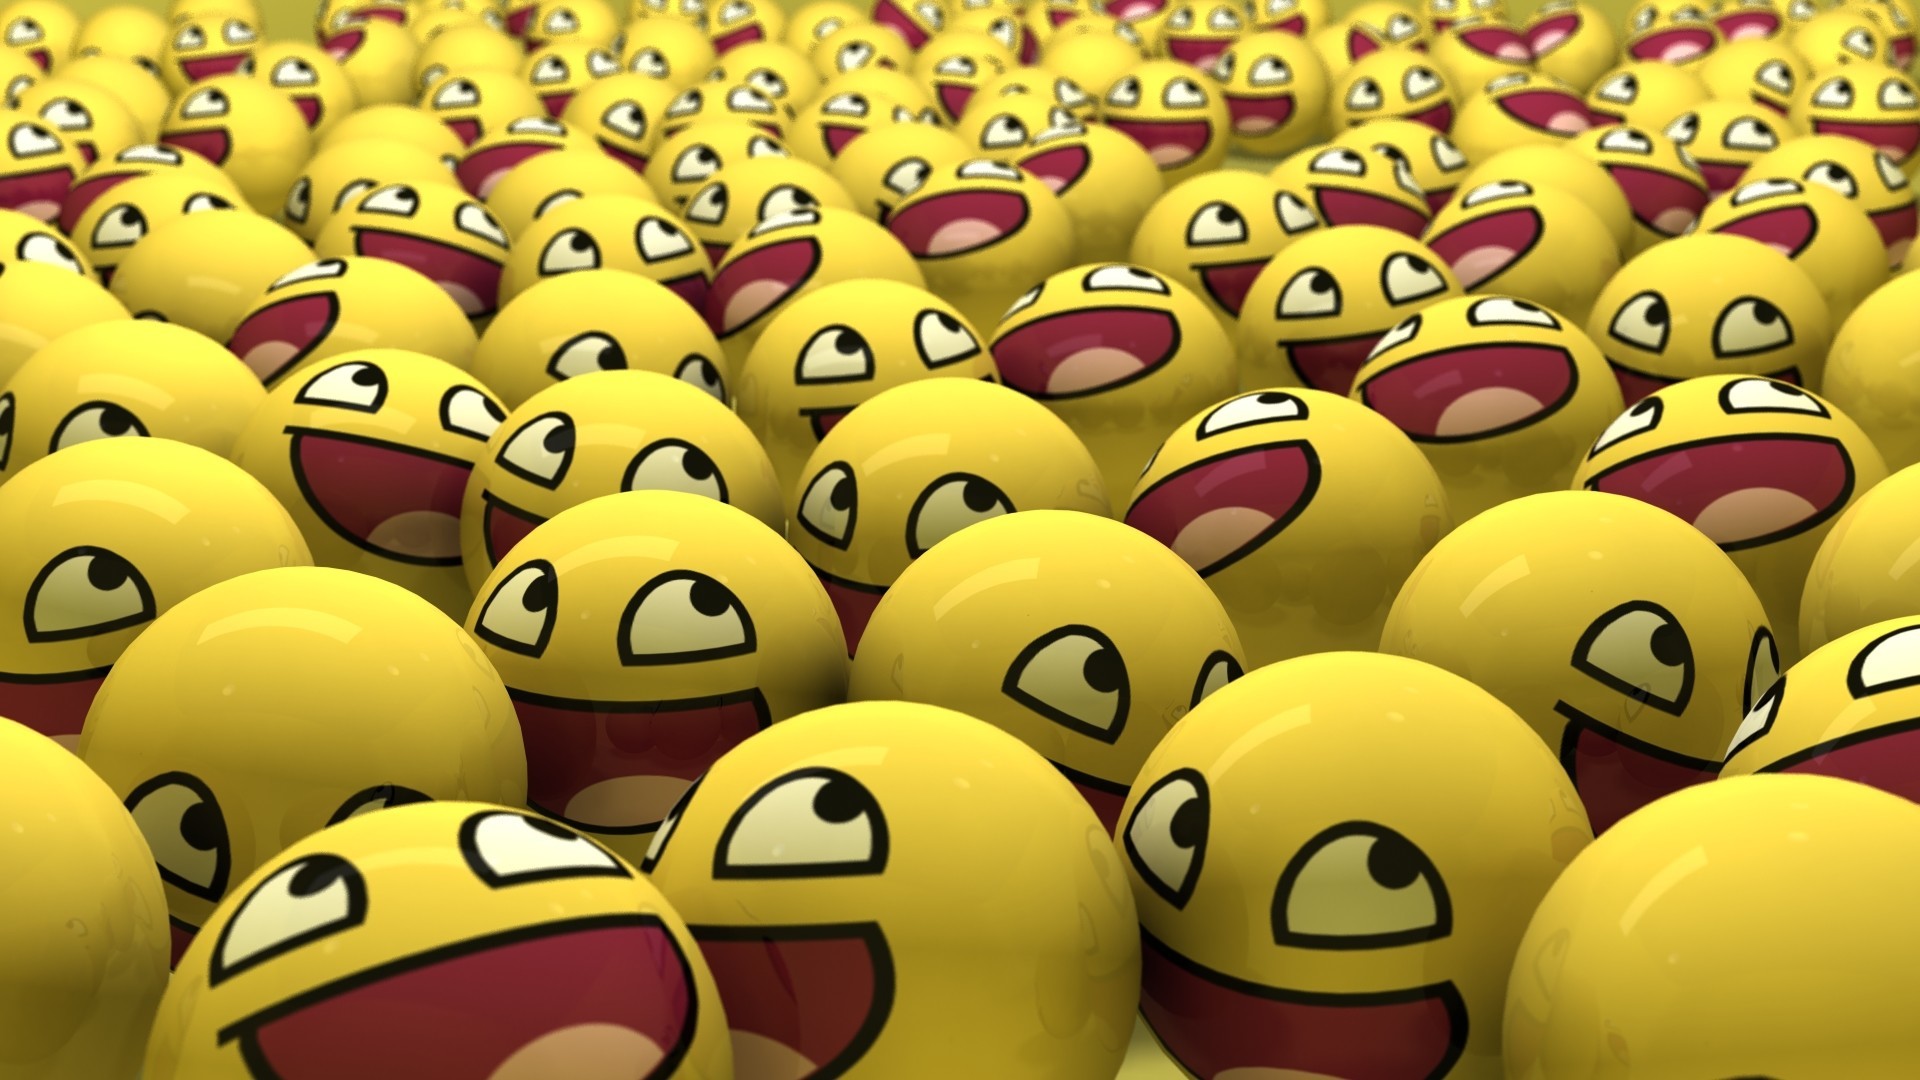 Awesome Smiley faces Wallpaper